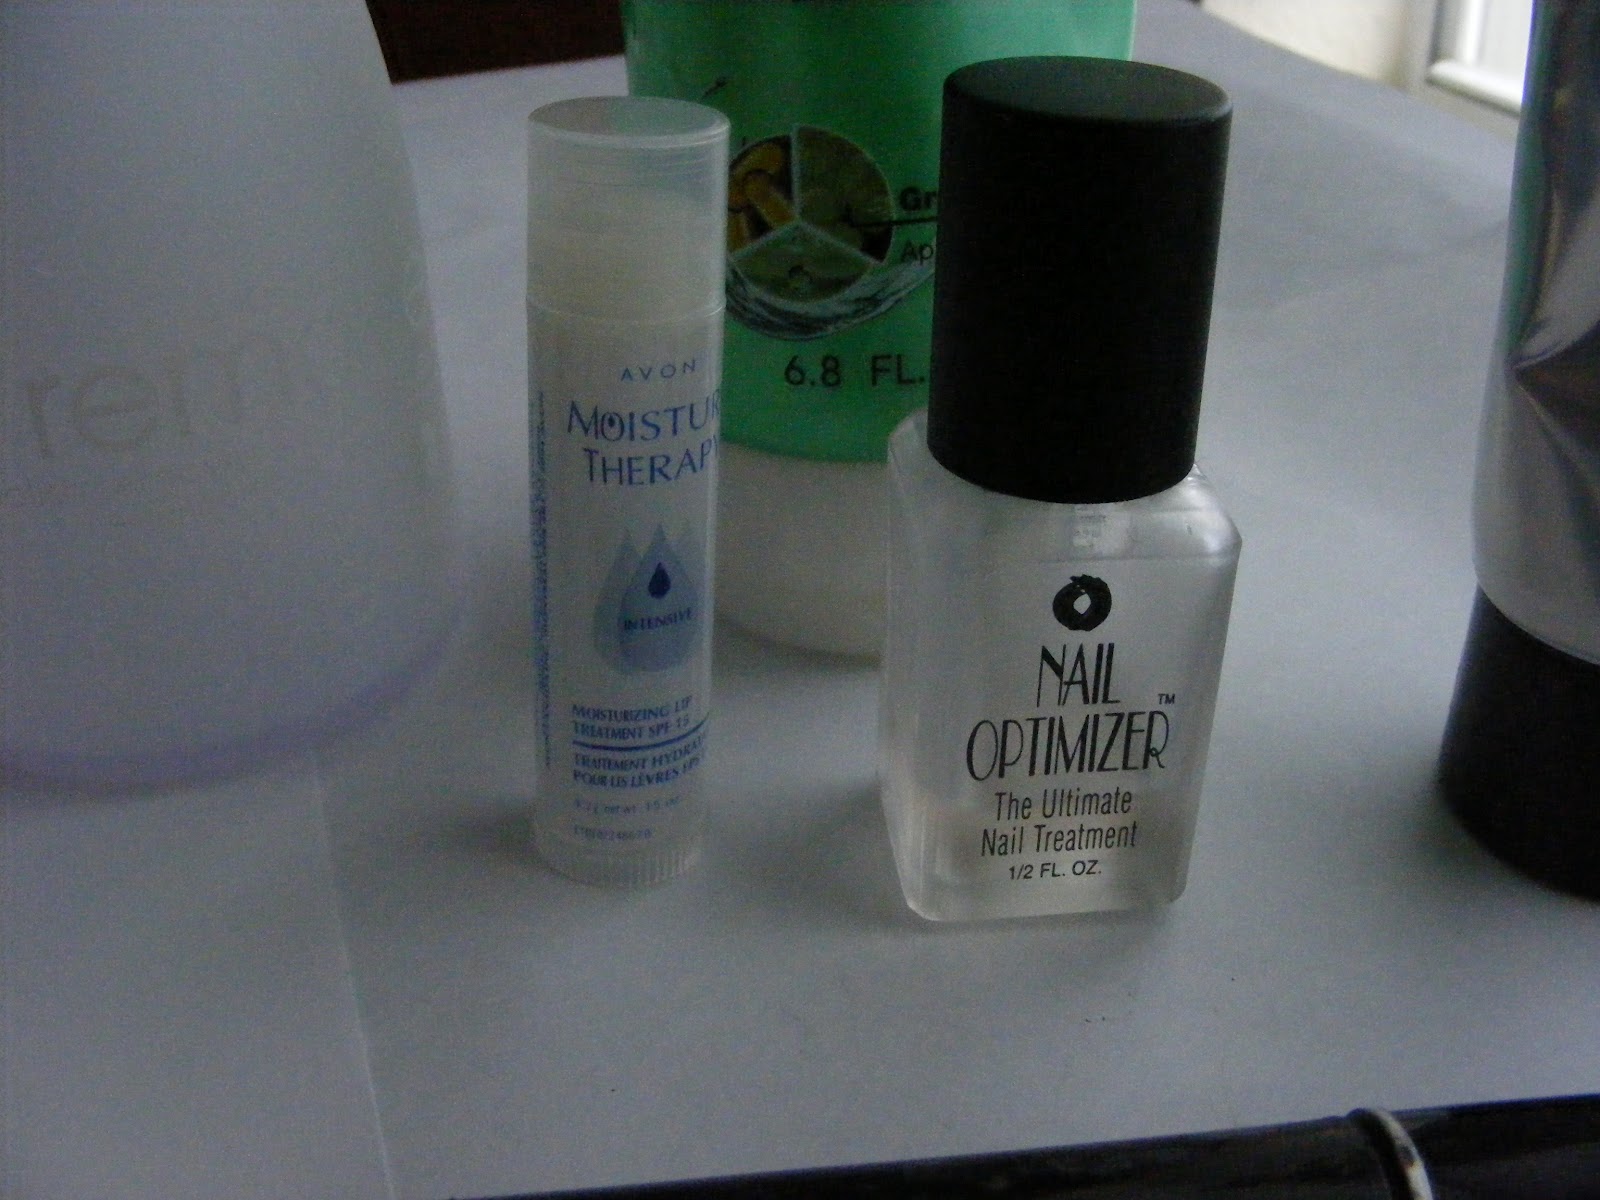 And next to the balm is Olan Laboratories Nail Optimizer